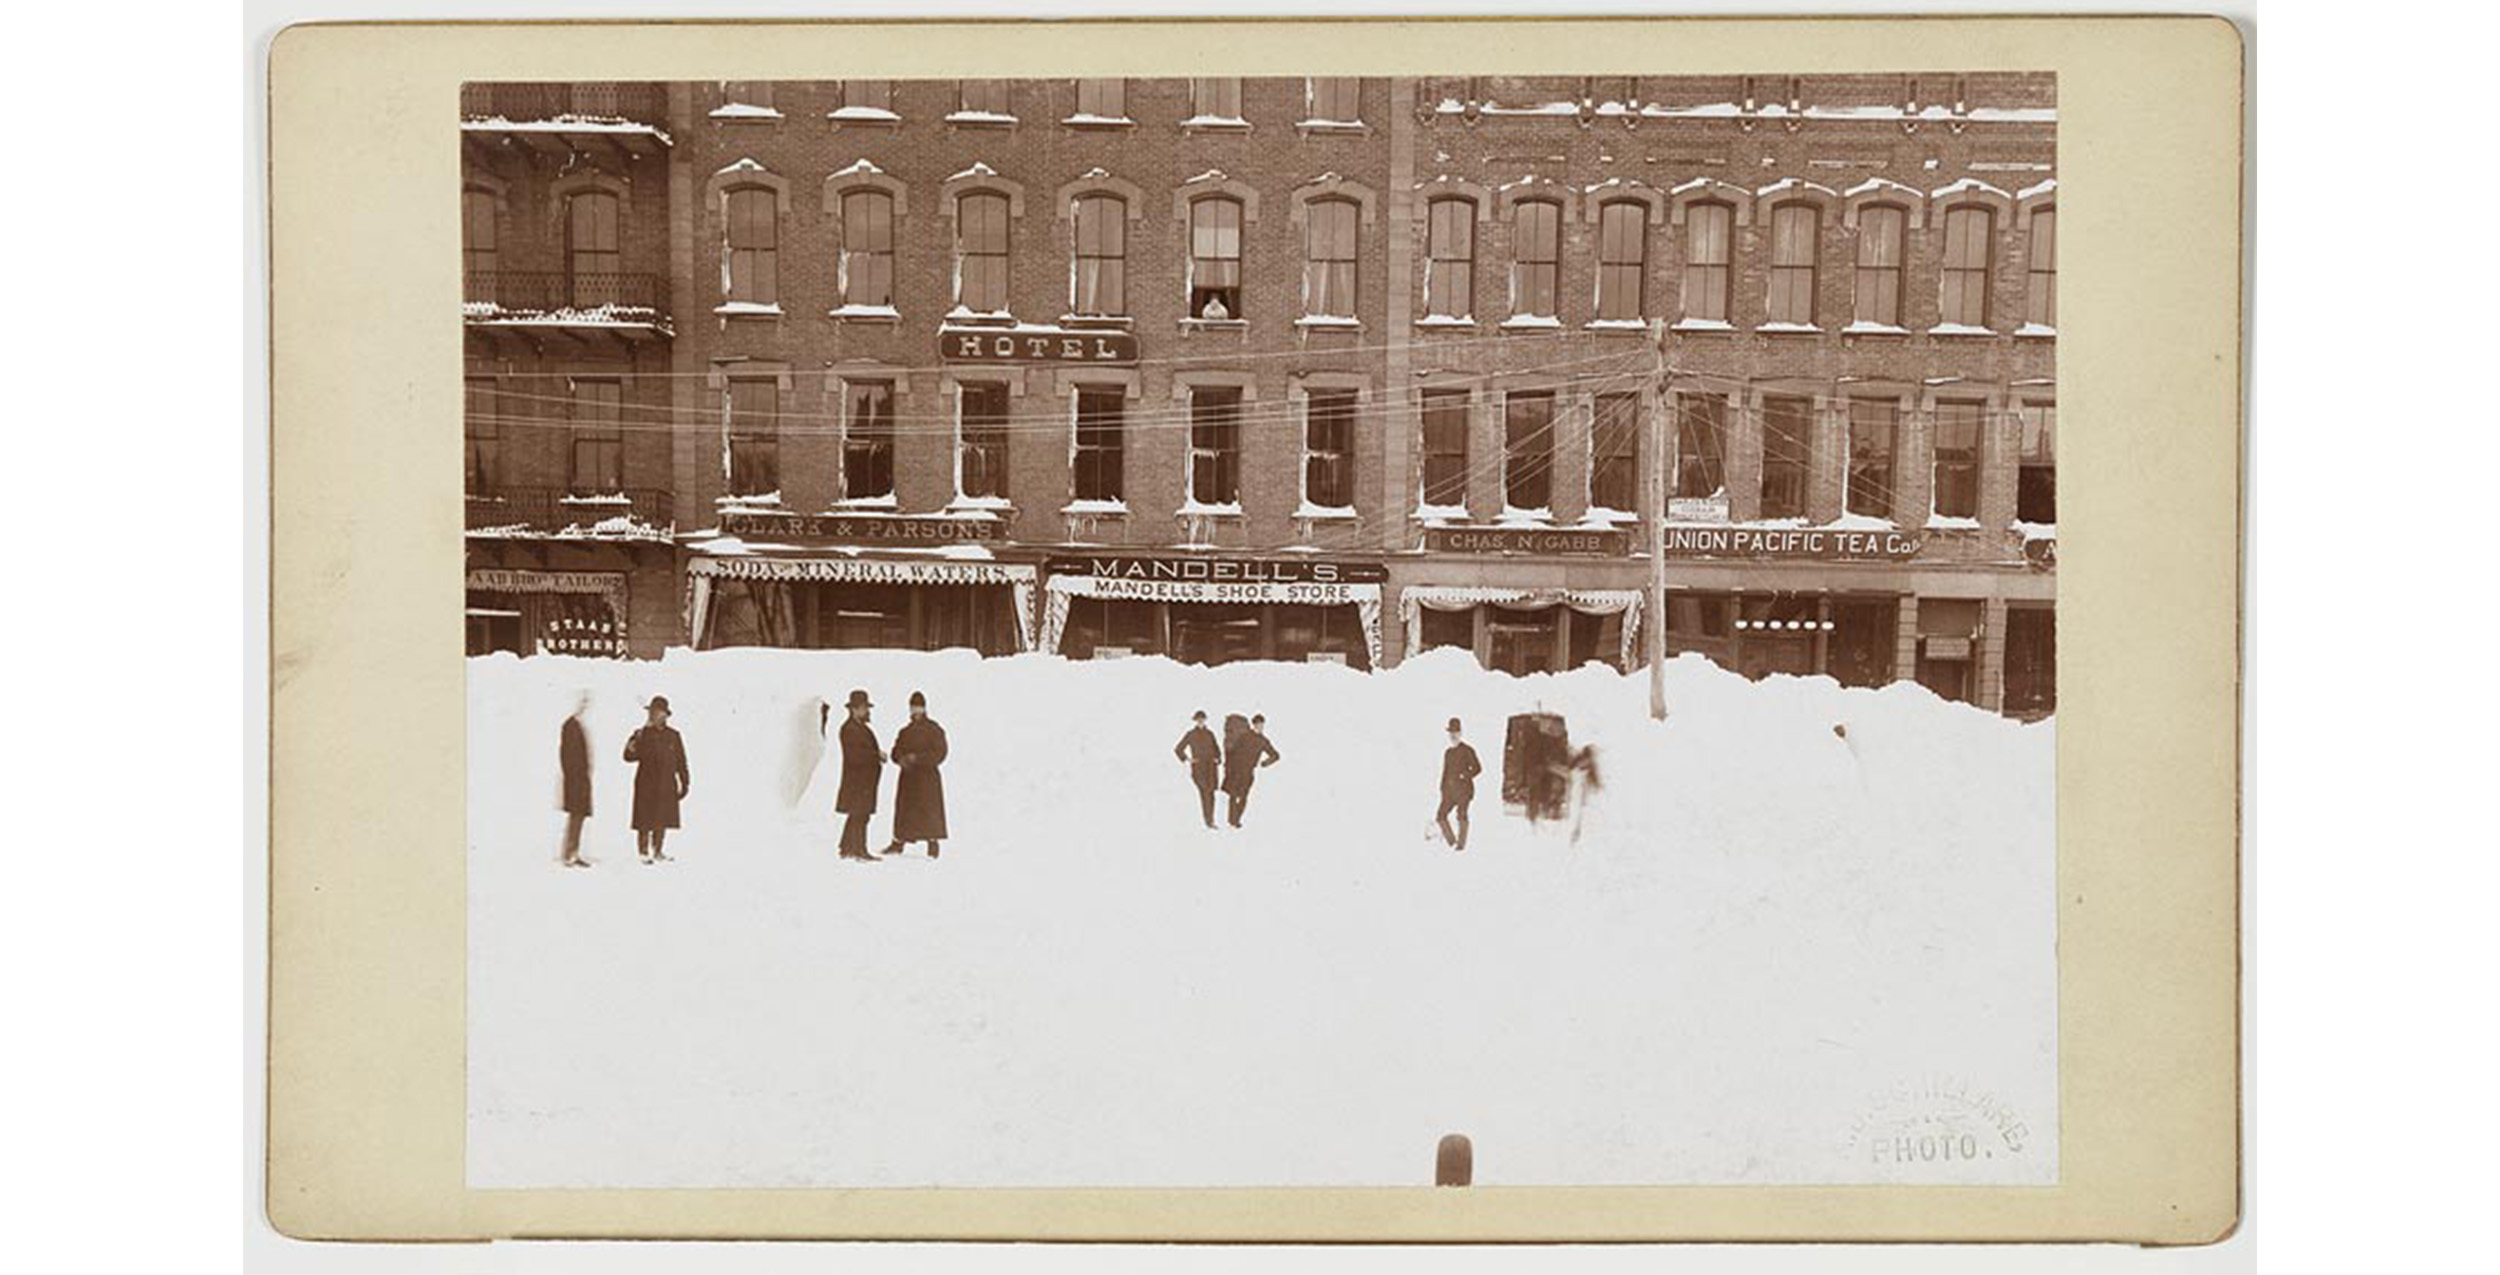 exterior, winter, city street under deep snow with attached brick buildings and eight scattered people standing in snow, signs on buildings include: HOTEL, AAB BROS TAILORS, CLARK & PARSONS, SODA and MINERAL WATERS, MANDELL'S SHOE STORE, CHA'S AND GABB, and UNION PACIFIC TEA Co.